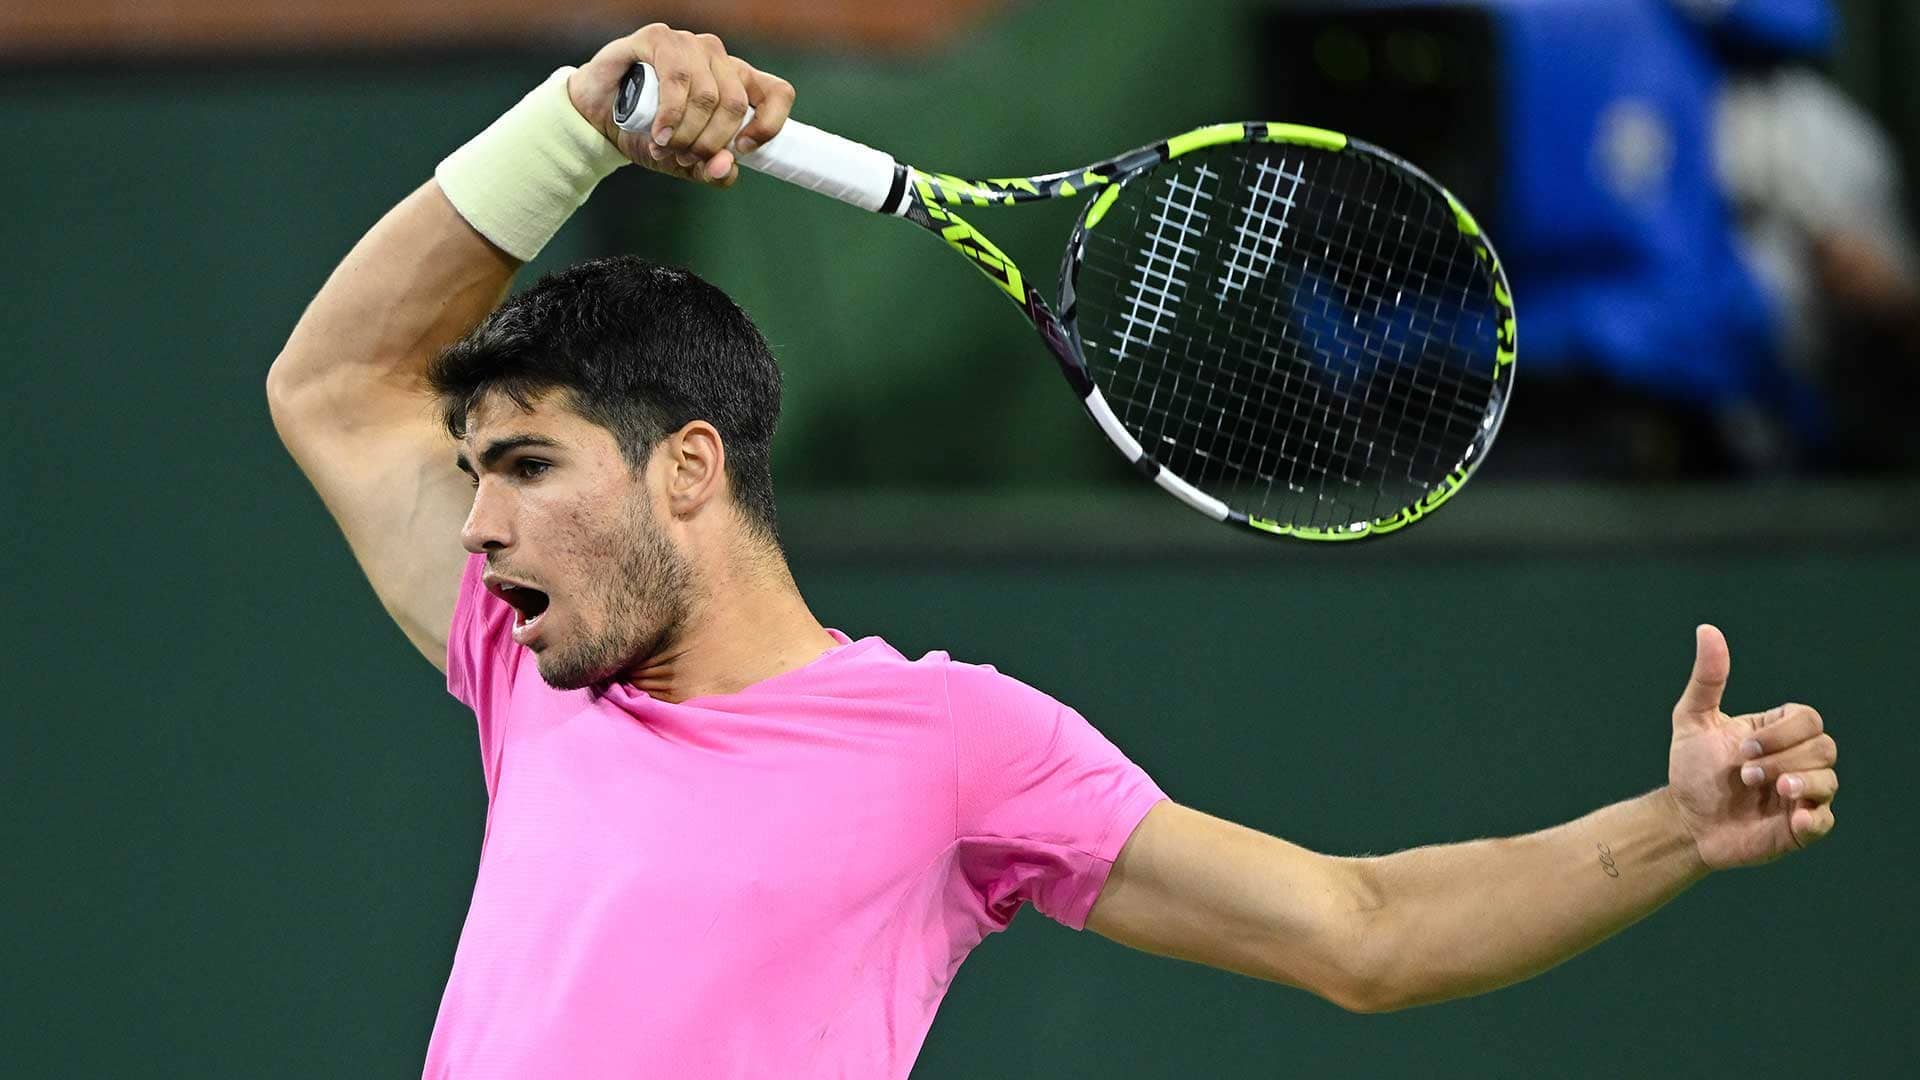 Carlos Alcaraz is chasing his third ATP Masters 1000 title in Indian Wells this week.